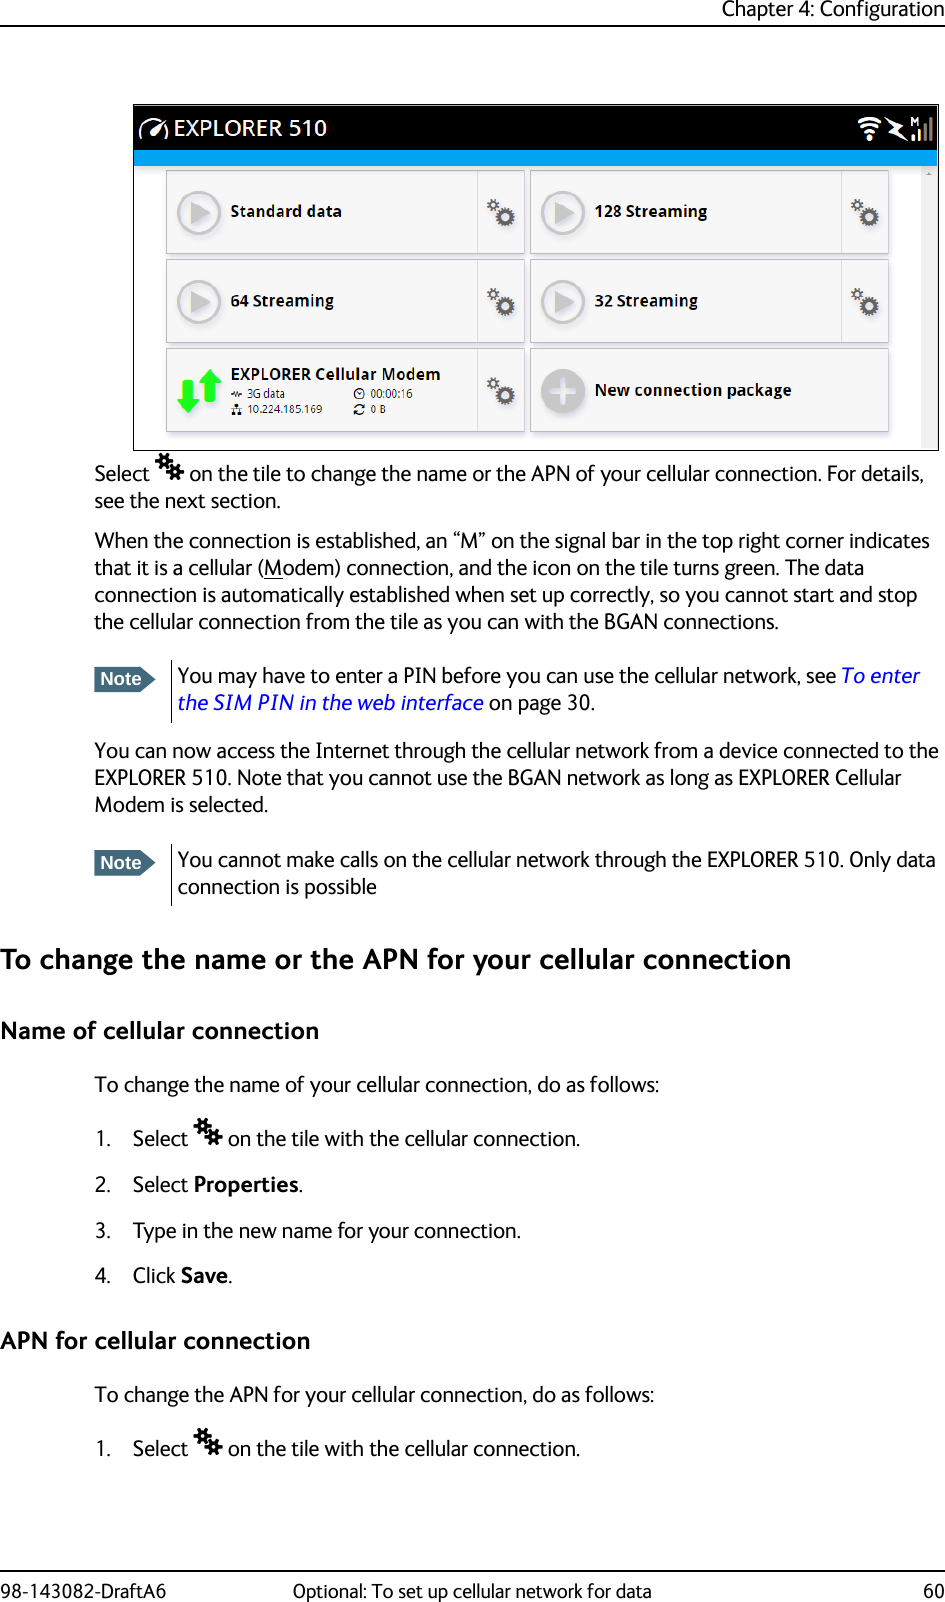 Chapter 4: Configuration98-143082-DraftA6 Optional: To set up cellular network for data 60Select  on the tile to change the name or the APN of your cellular connection. For details, see the next section.When the connection is established, an “M” on the signal bar in the top right corner indicates that it is a cellular (Modem) connection, and the icon on the tile turns green. The data connection is automatically established when set up correctly, so you cannot start and stop the cellular connection from the tile as you can with the BGAN connections.You can now access the Internet through the cellular network from a device connected to the EXPLORER 510. Note that you cannot use the BGAN network as long as EXPLORER Cellular Modem is selected.To change the name or the APN for your cellular connectionName of cellular connectionTo change the name of your cellular connection, do as follows:1. Select  on the tile with the cellular connection.2. Select Properties.3. Type in the new name for your connection.4. Click Save.APN for cellular connectionTo change the APN for your cellular connection, do as follows:1. Select  on the tile with the cellular connection.NoteYou may have to enter a PIN before you can use the cellular network, see To enter the SIM PIN in the web interface on page 30.NoteYou cannot make calls on the cellular network through the EXPLORER 510. Only data connection is possible